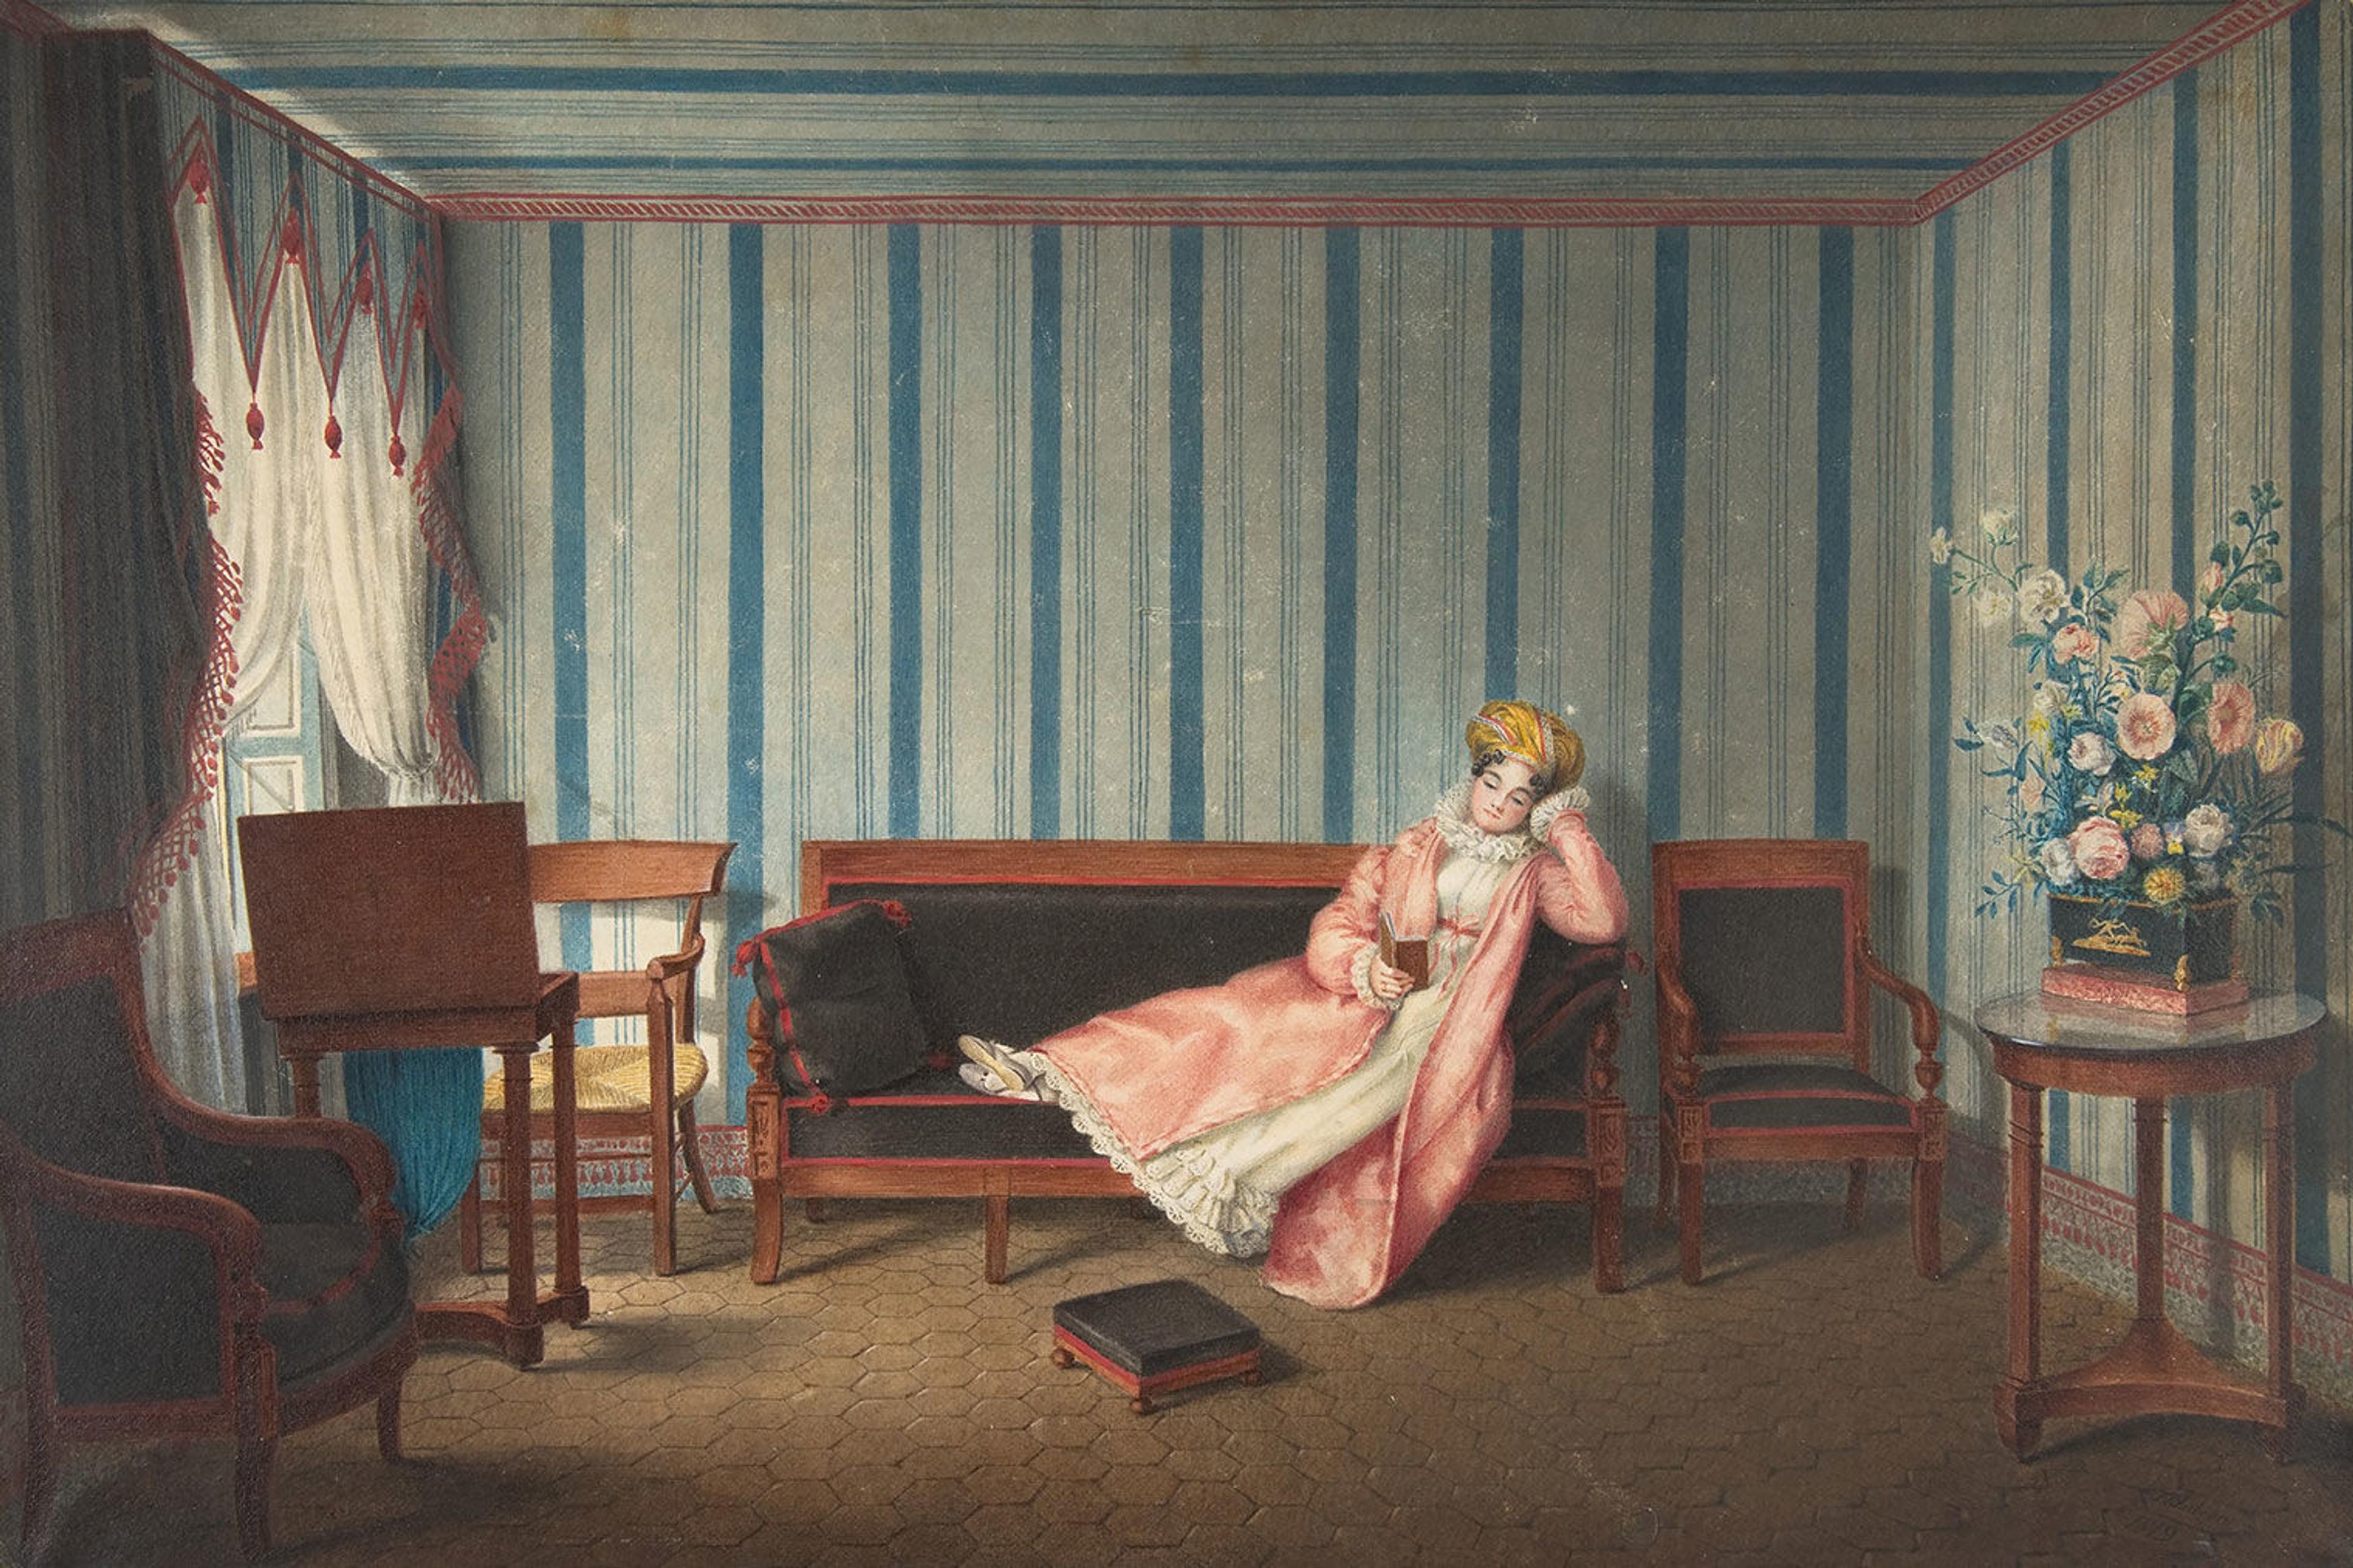 A painting of a woman wearing a robe, lying on a chaise lounge in an elegant room